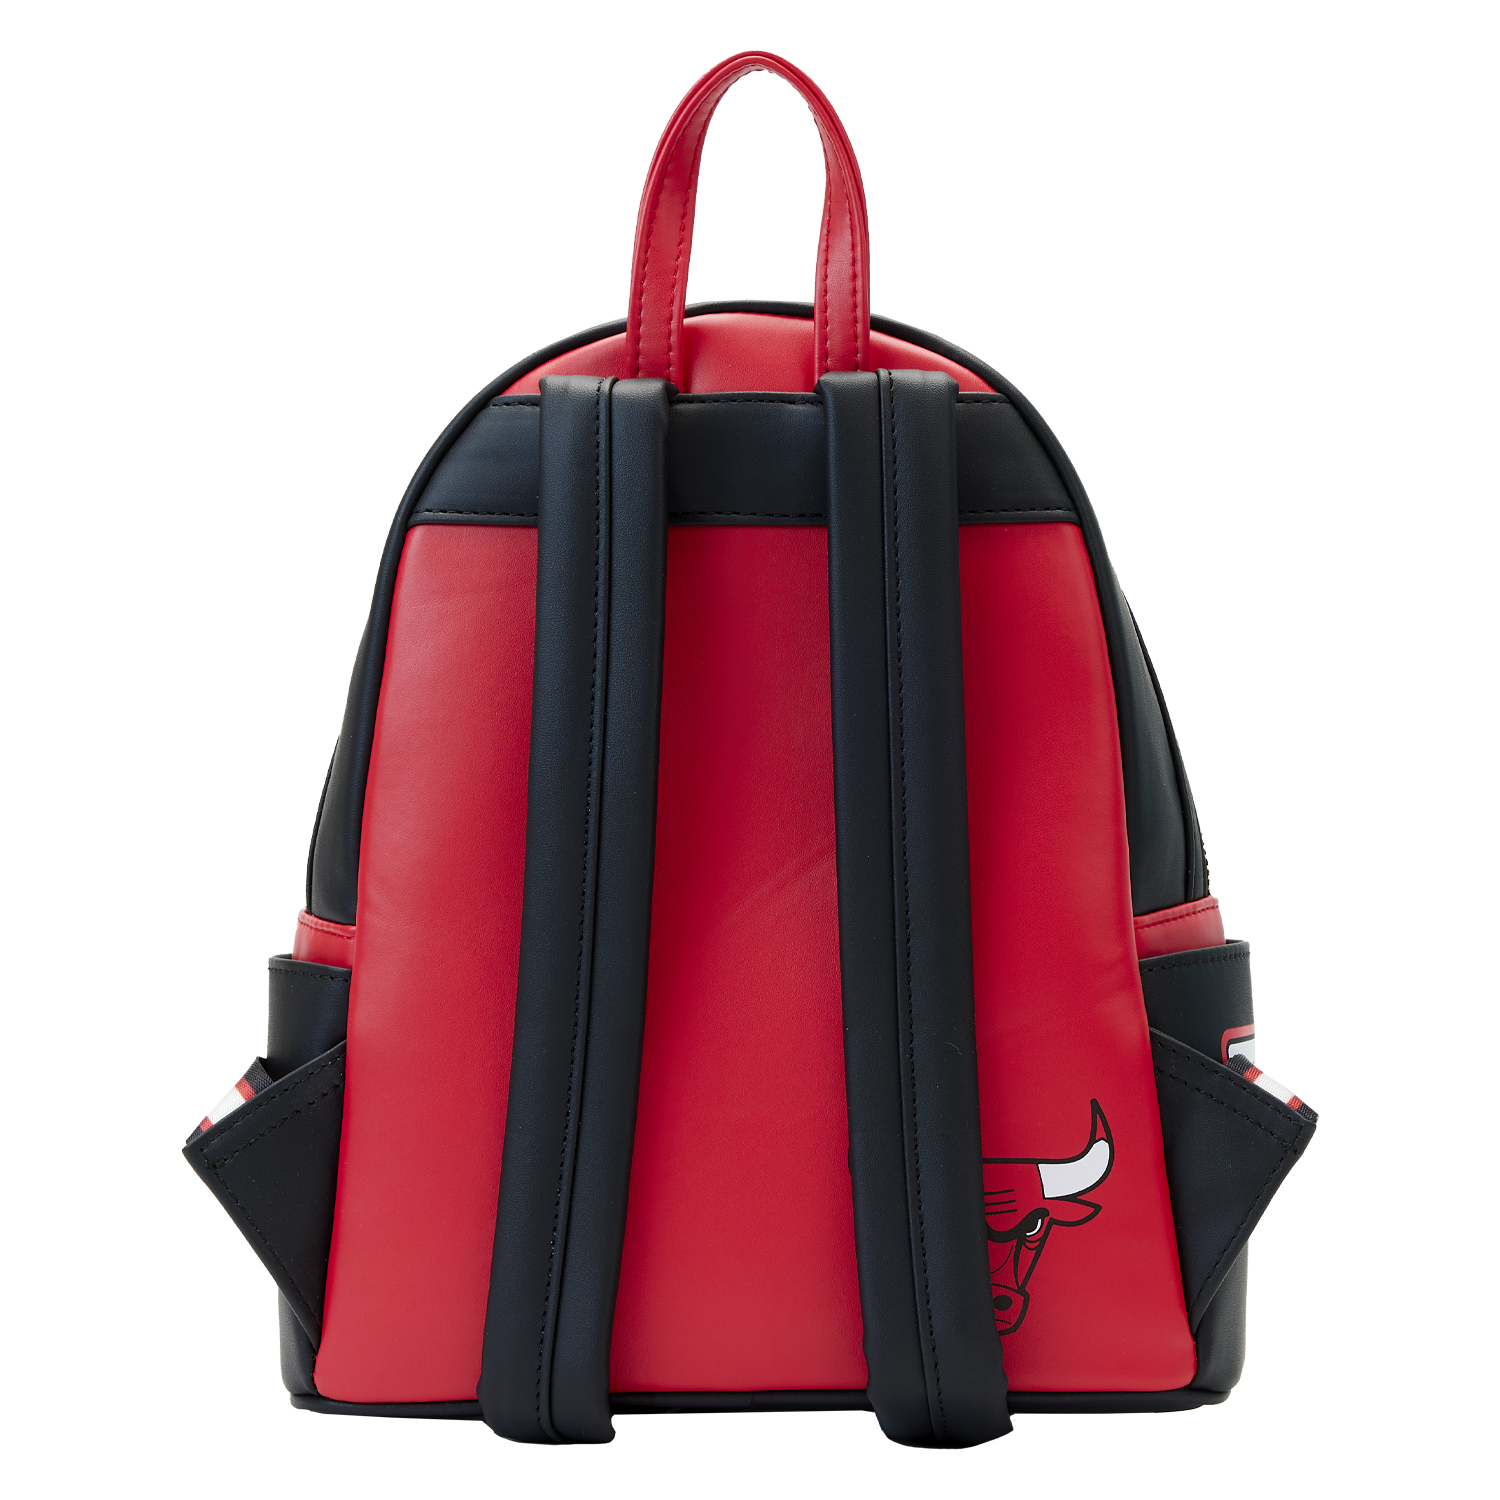 NBA CHICAGO BULLS PATCH ICONS MINI BACKPACK